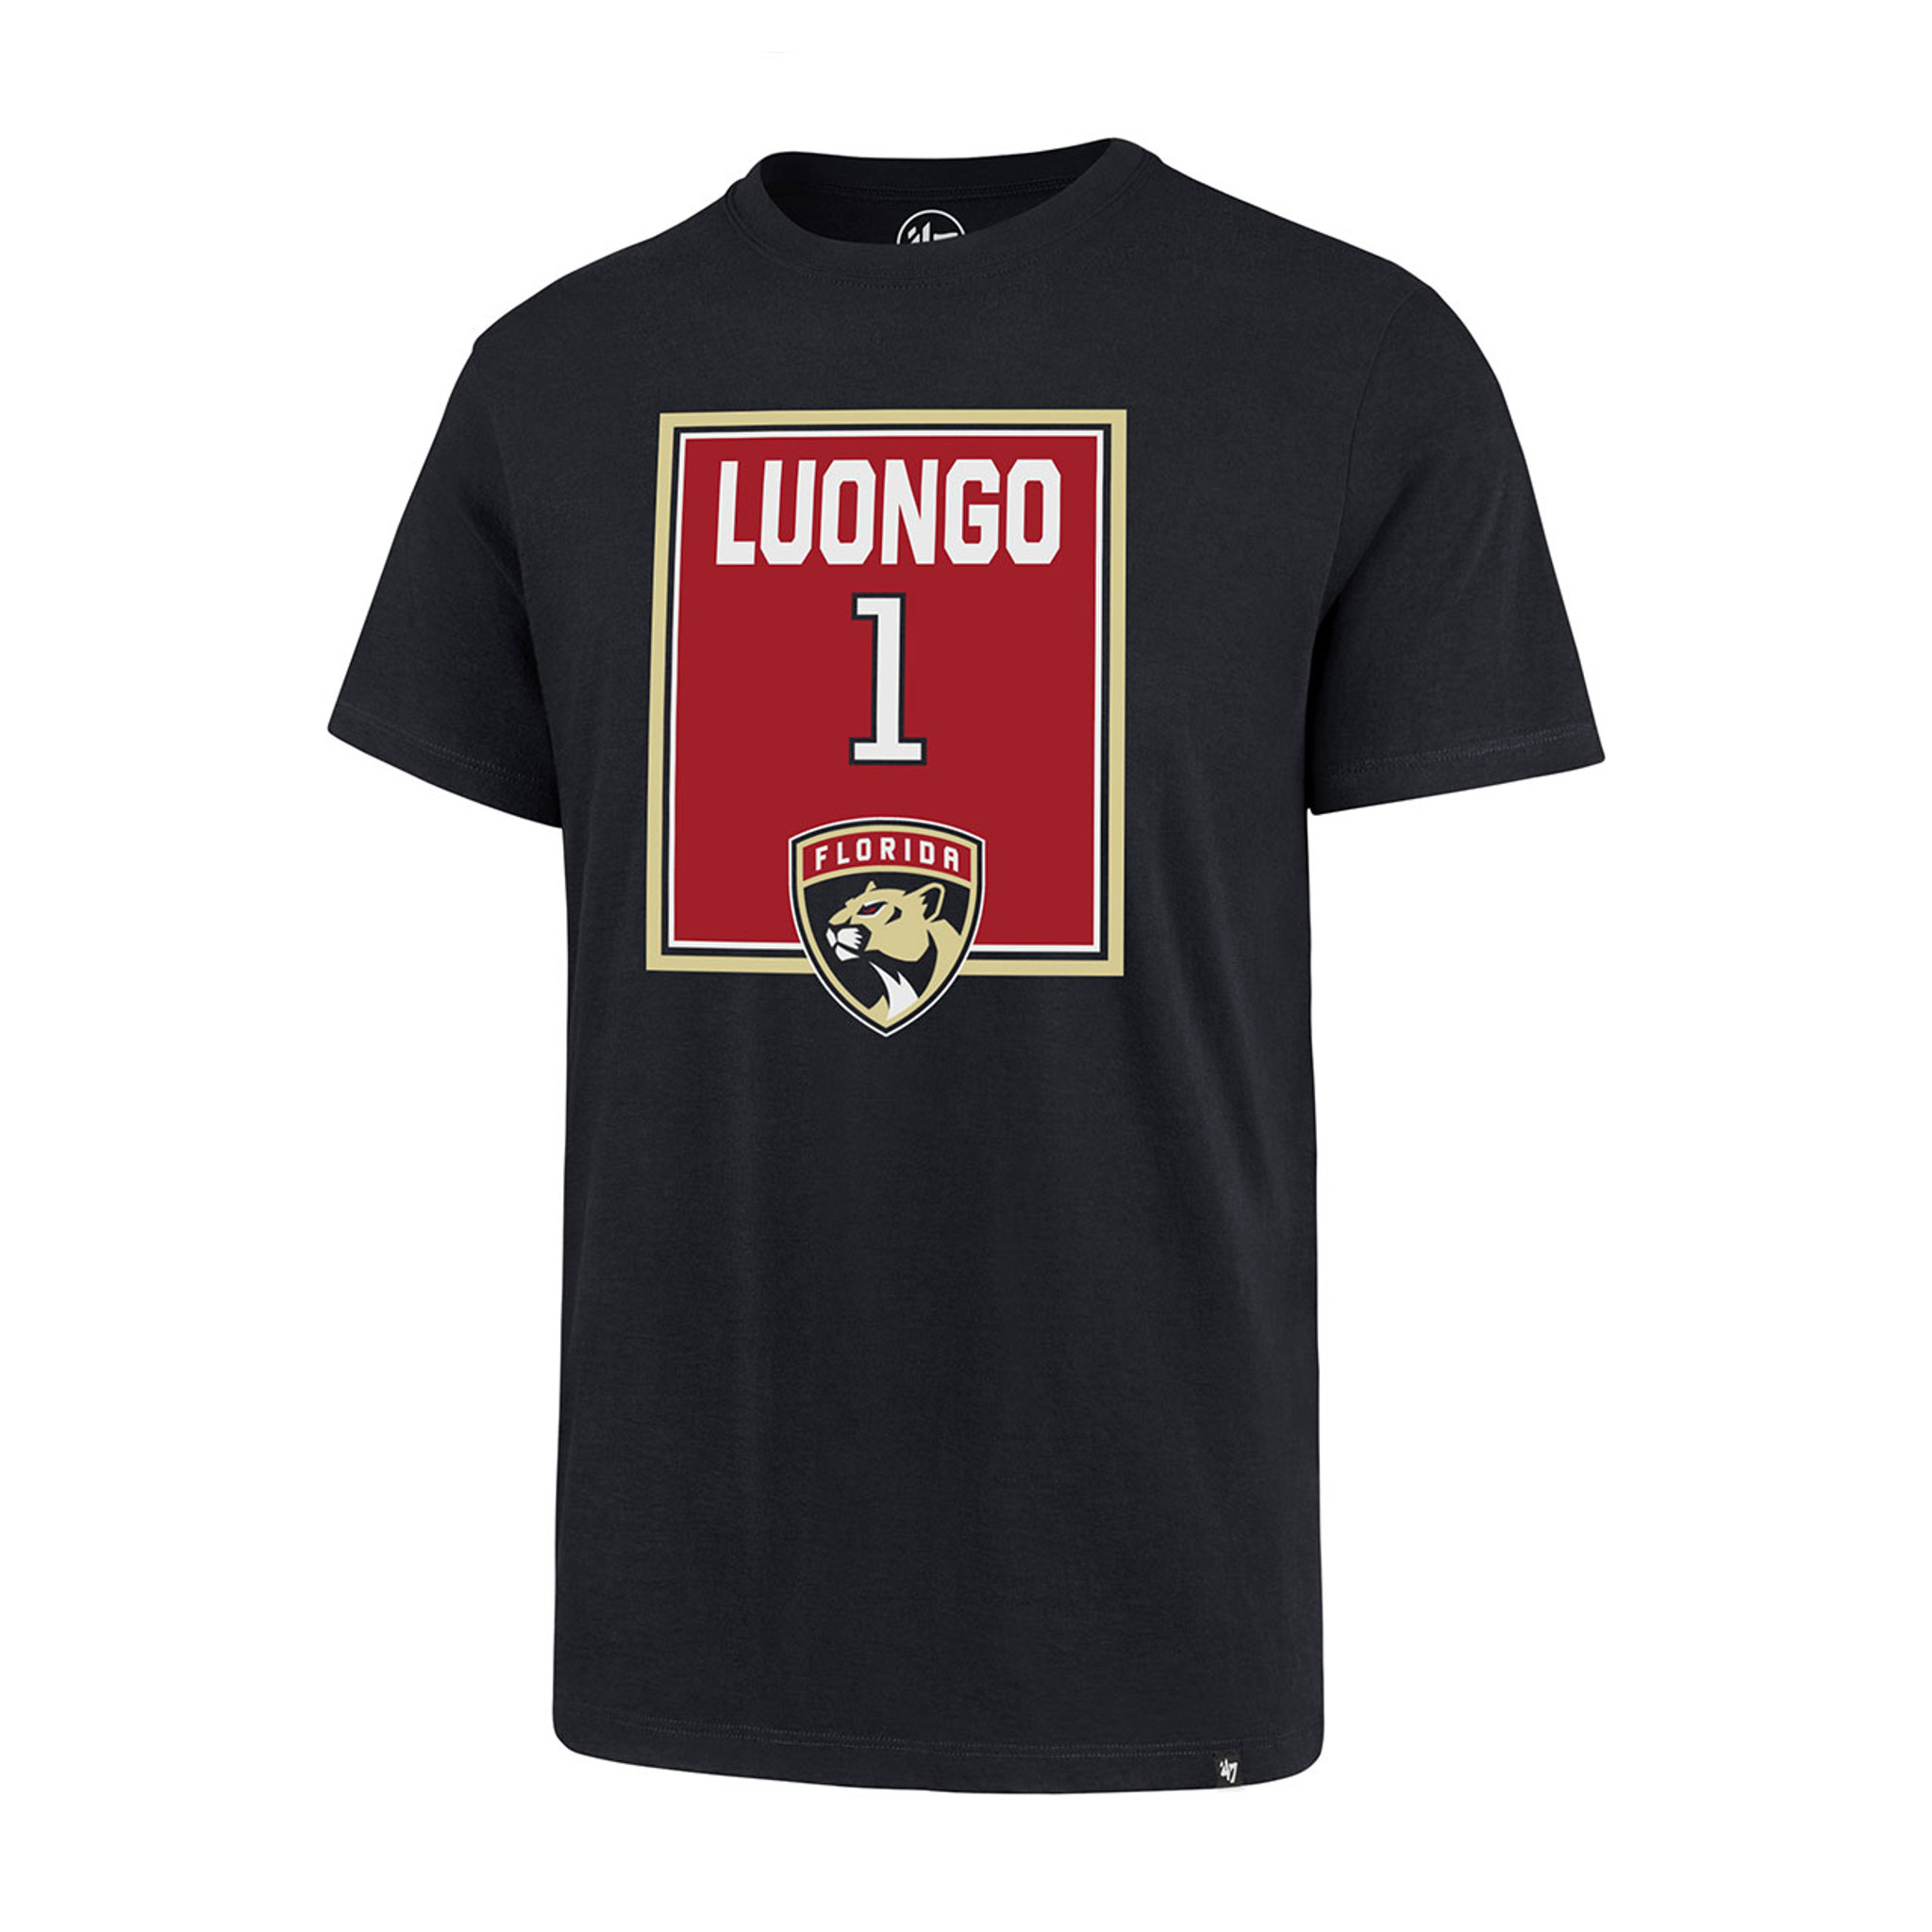 Roberto Luongo to have jersey retired by Florida Panthers